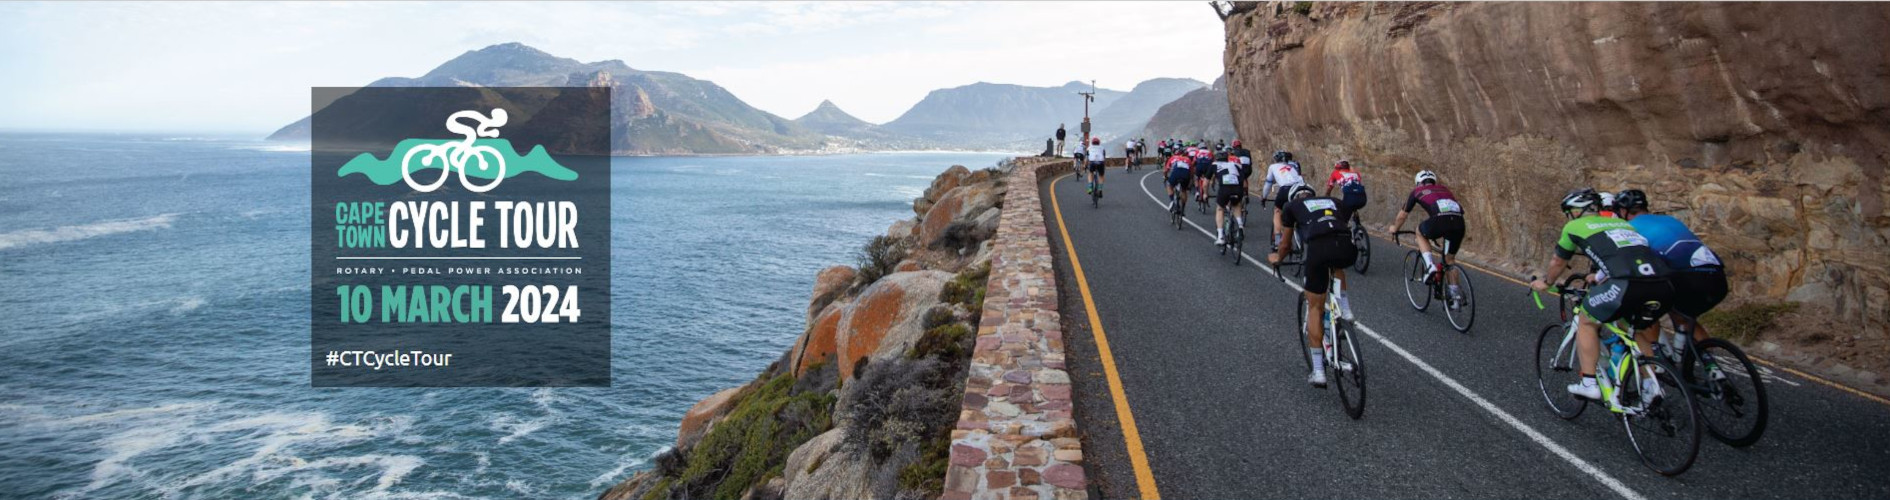 ct cycle tour results 2023